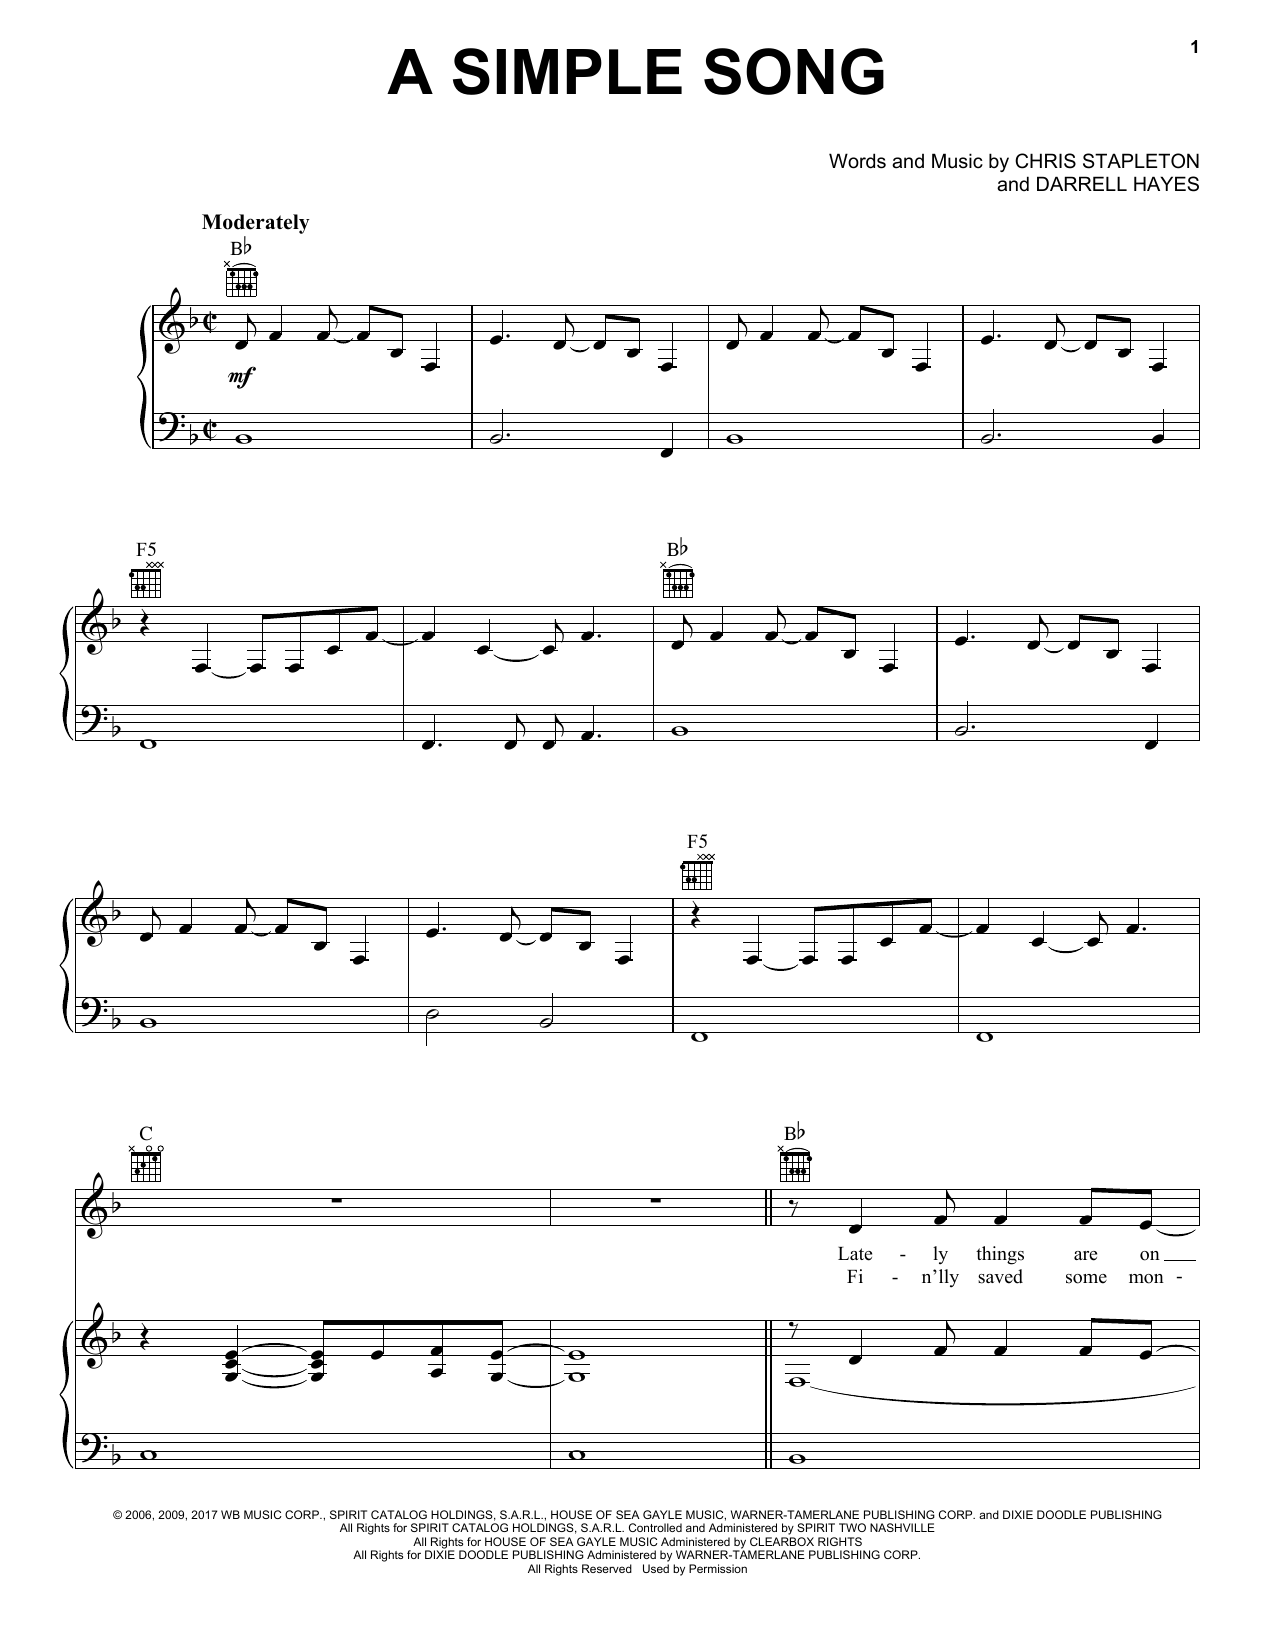 Download Chris Stapleton A Simple Song Sheet Music